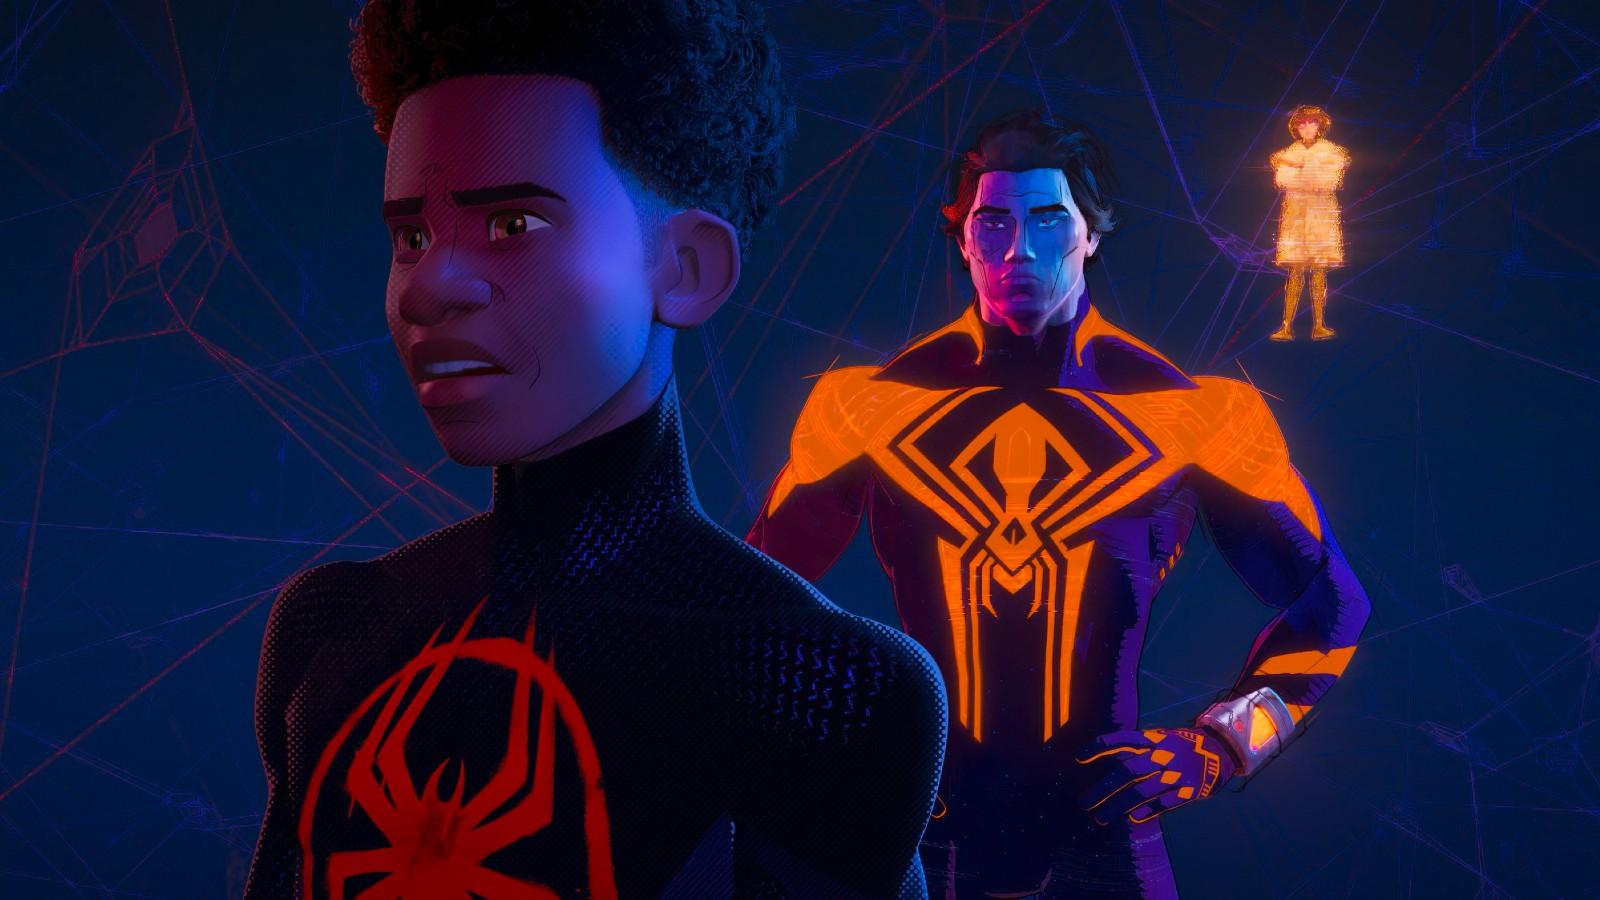 Spider-Man: Across the Spider-Verse poster might have spoiled its